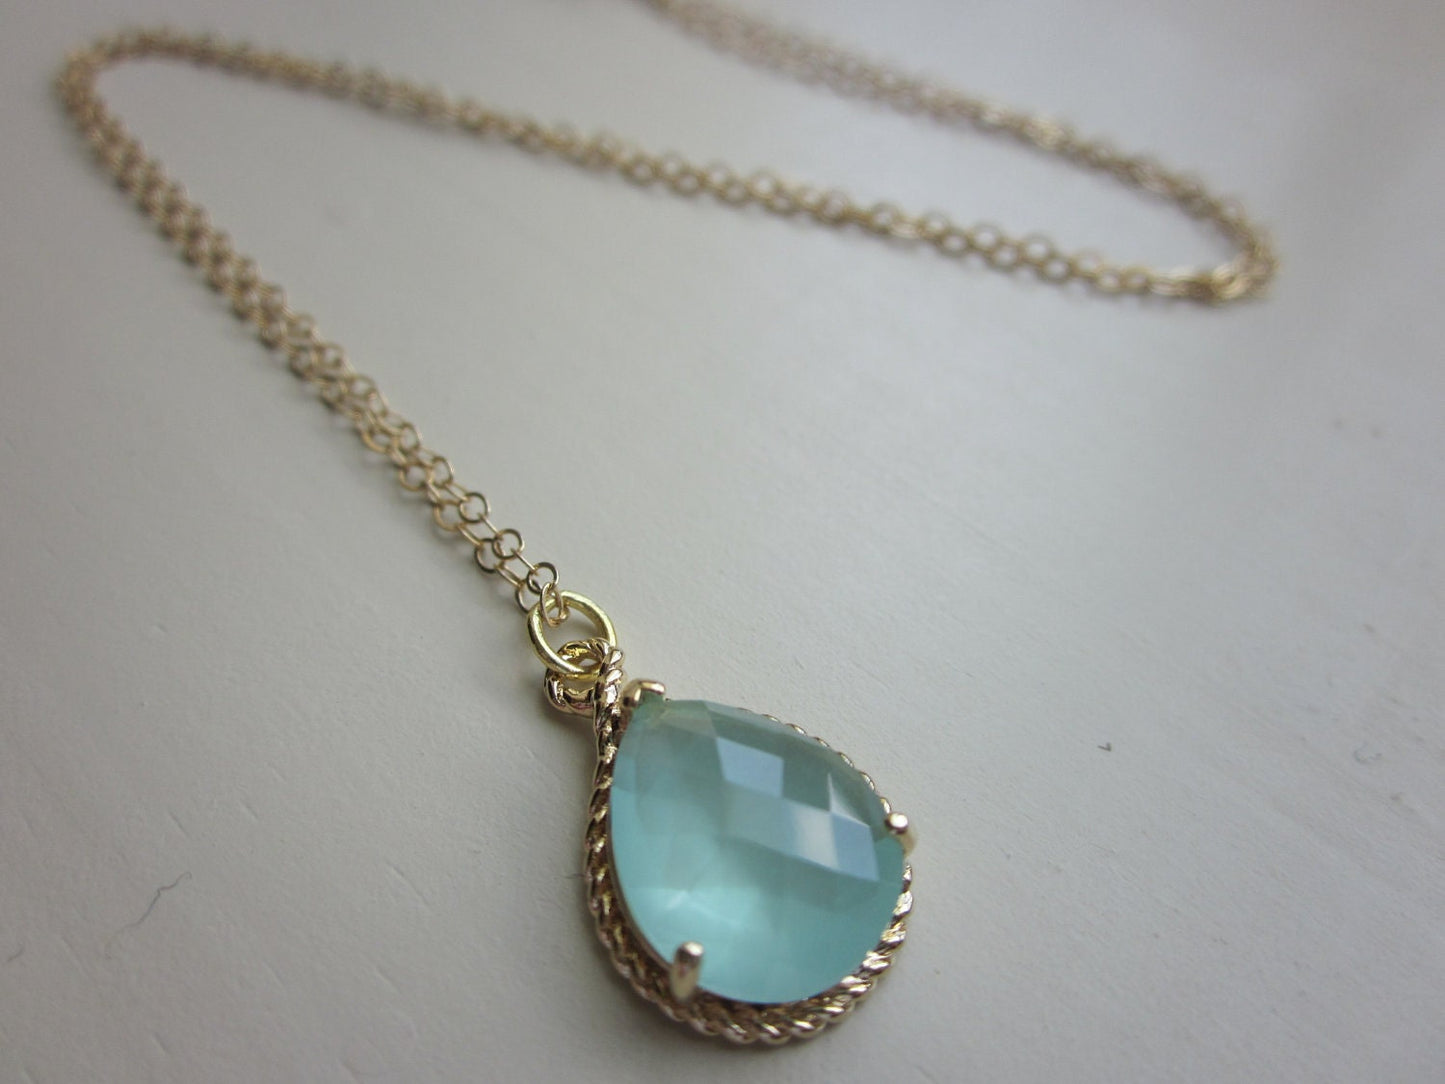 Pacific Aqua Blue Mint Pendant Necklace Gold Teardrop - 14k Gold Filled Chain - Bridesmaid Necklace - Bridesmaid Jewelry - Wedding Jewelry